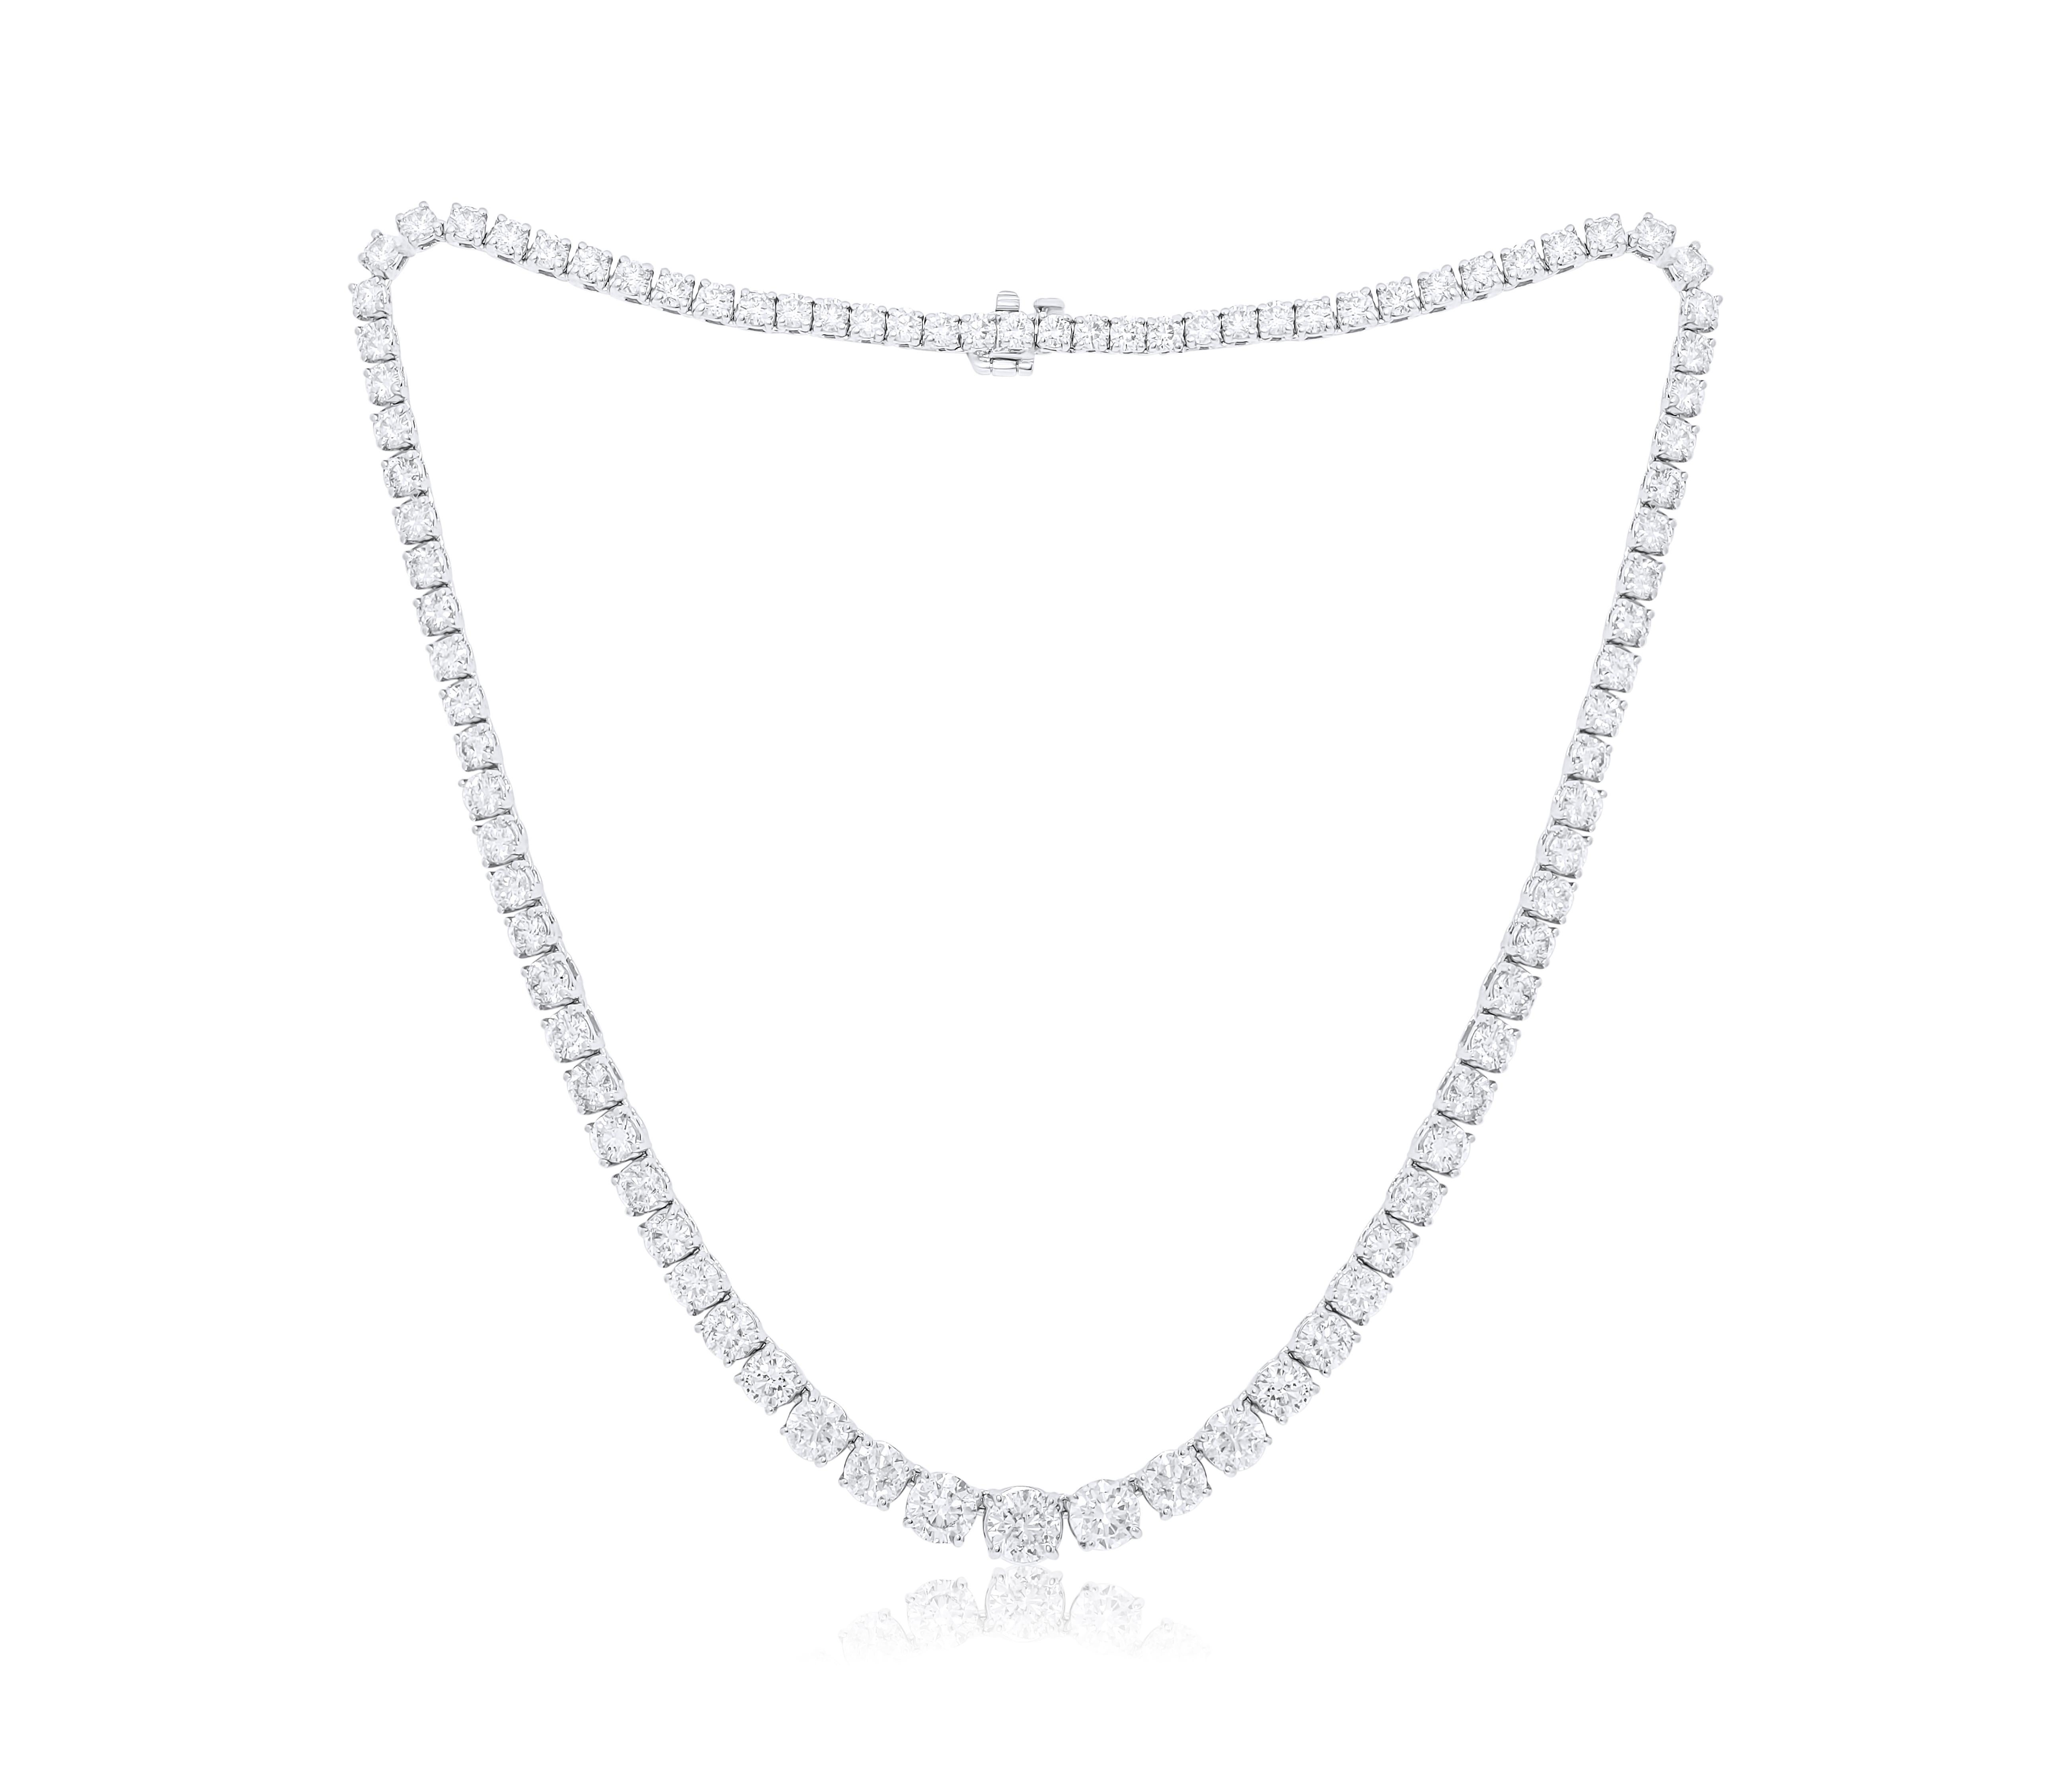 Modern Diana M. Custom 17.45 Cts Round Diamond Graduated 18k White Gold Tennis Necklace For Sale